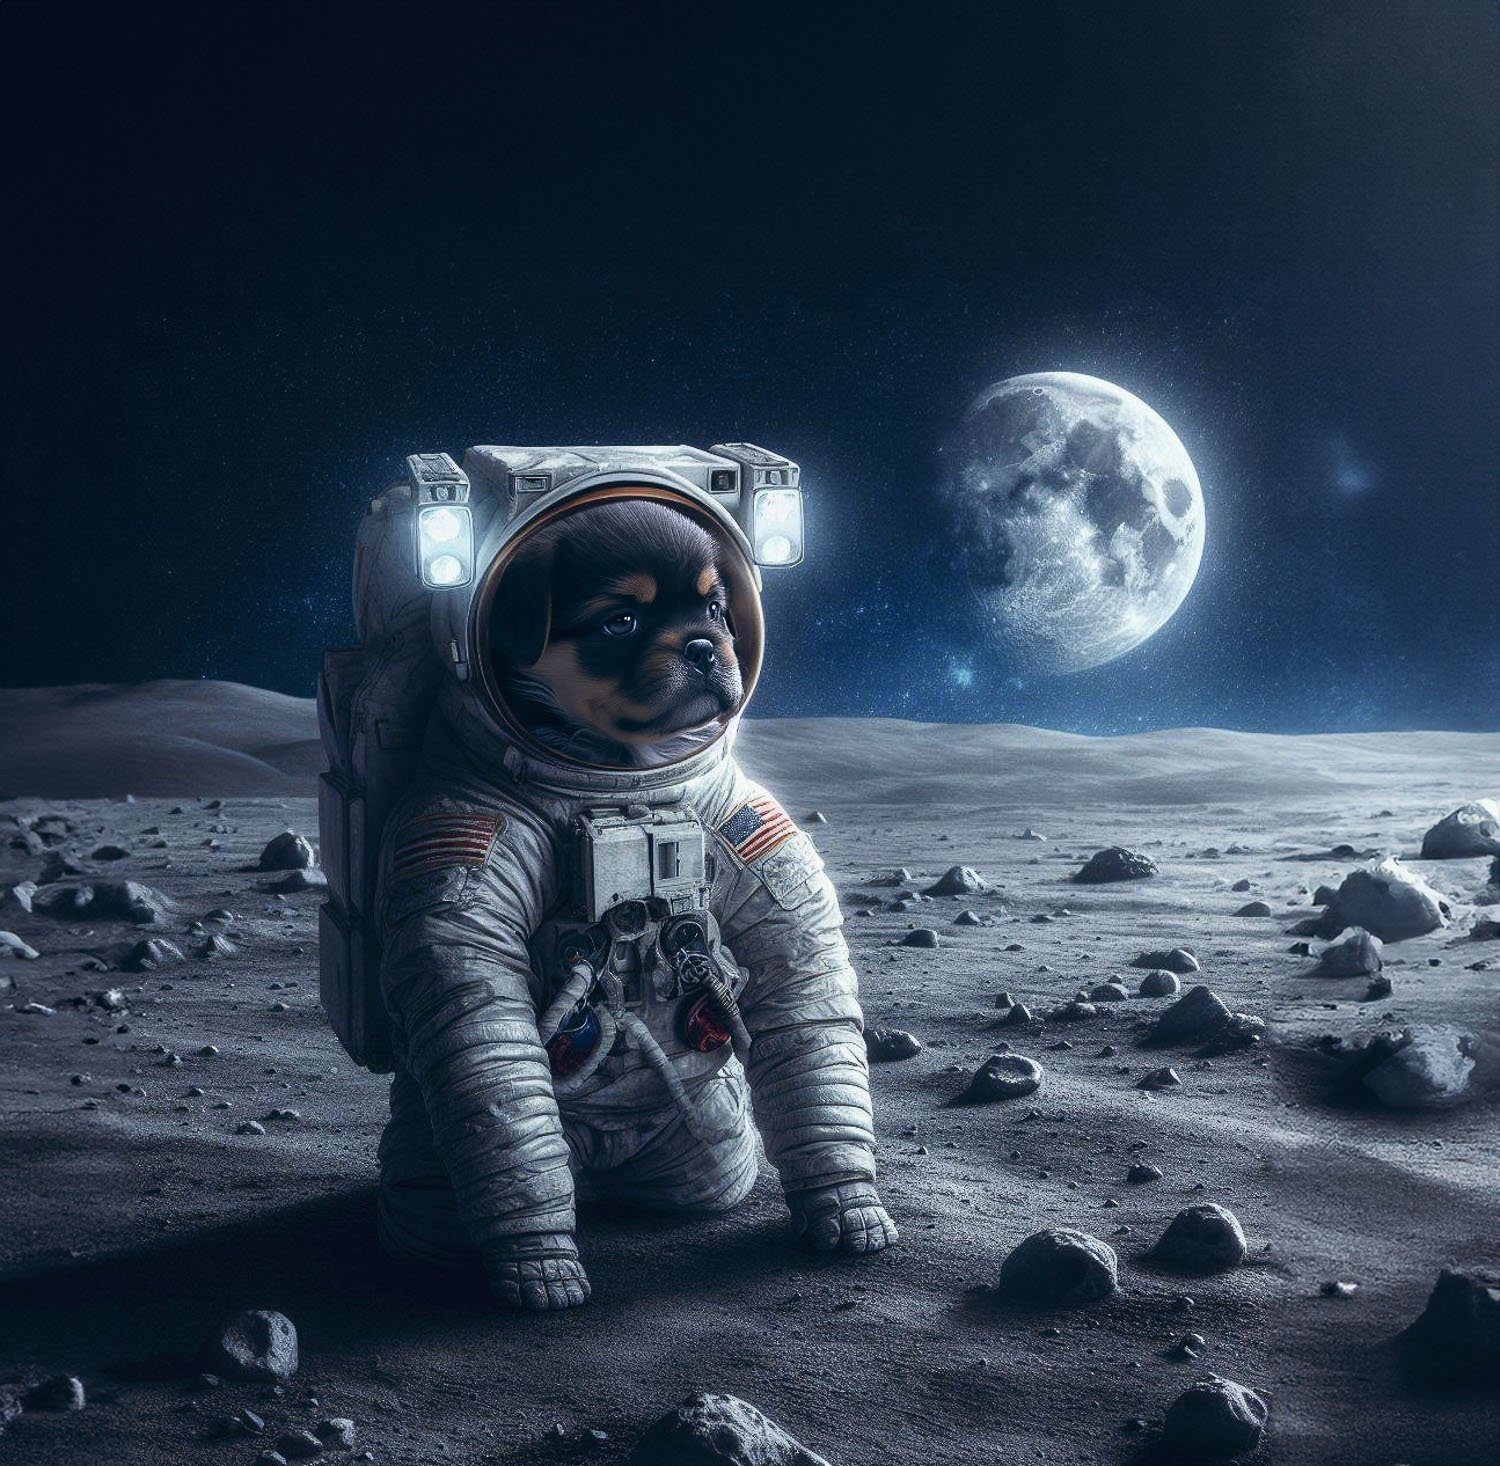 A small puppy in a space suit sitting down on a desolate planet with a moon in the background                                                         